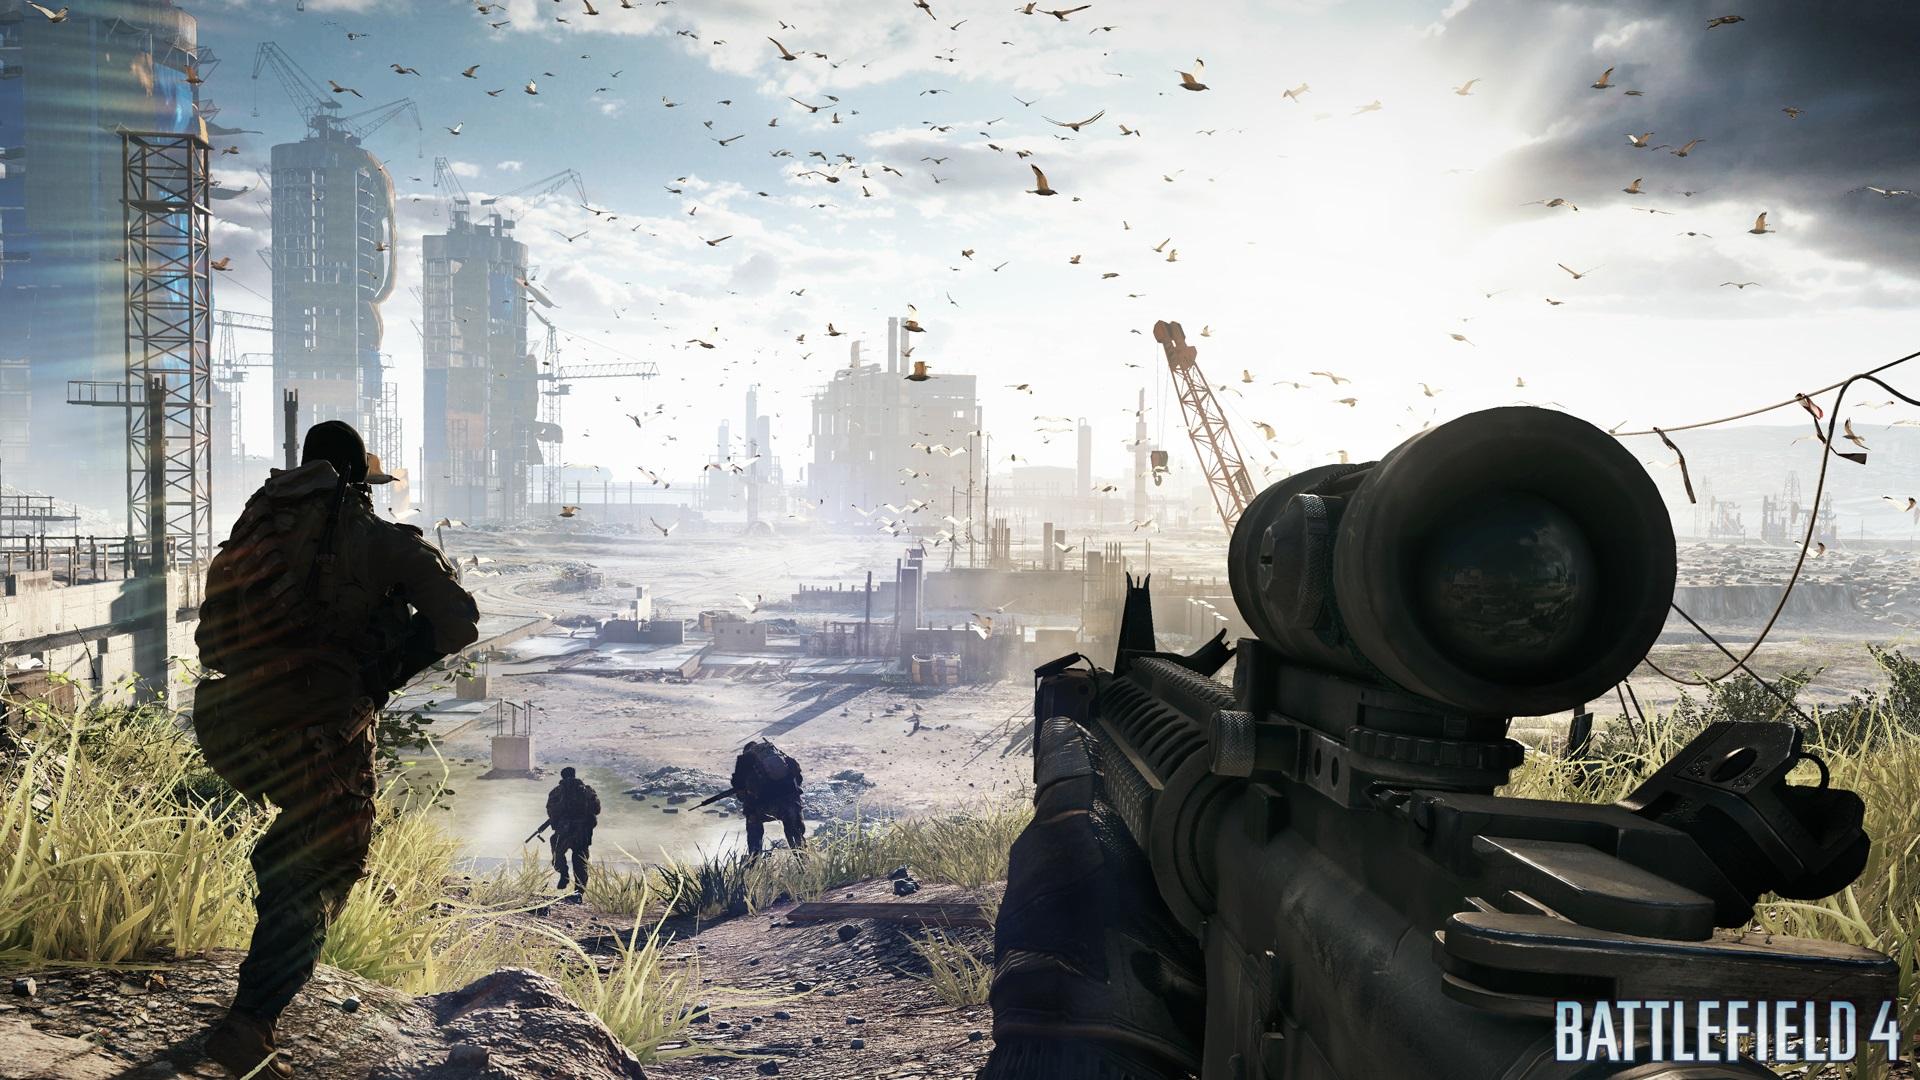 S&S; News: Battlefield 4 PC specs appear on Uplay